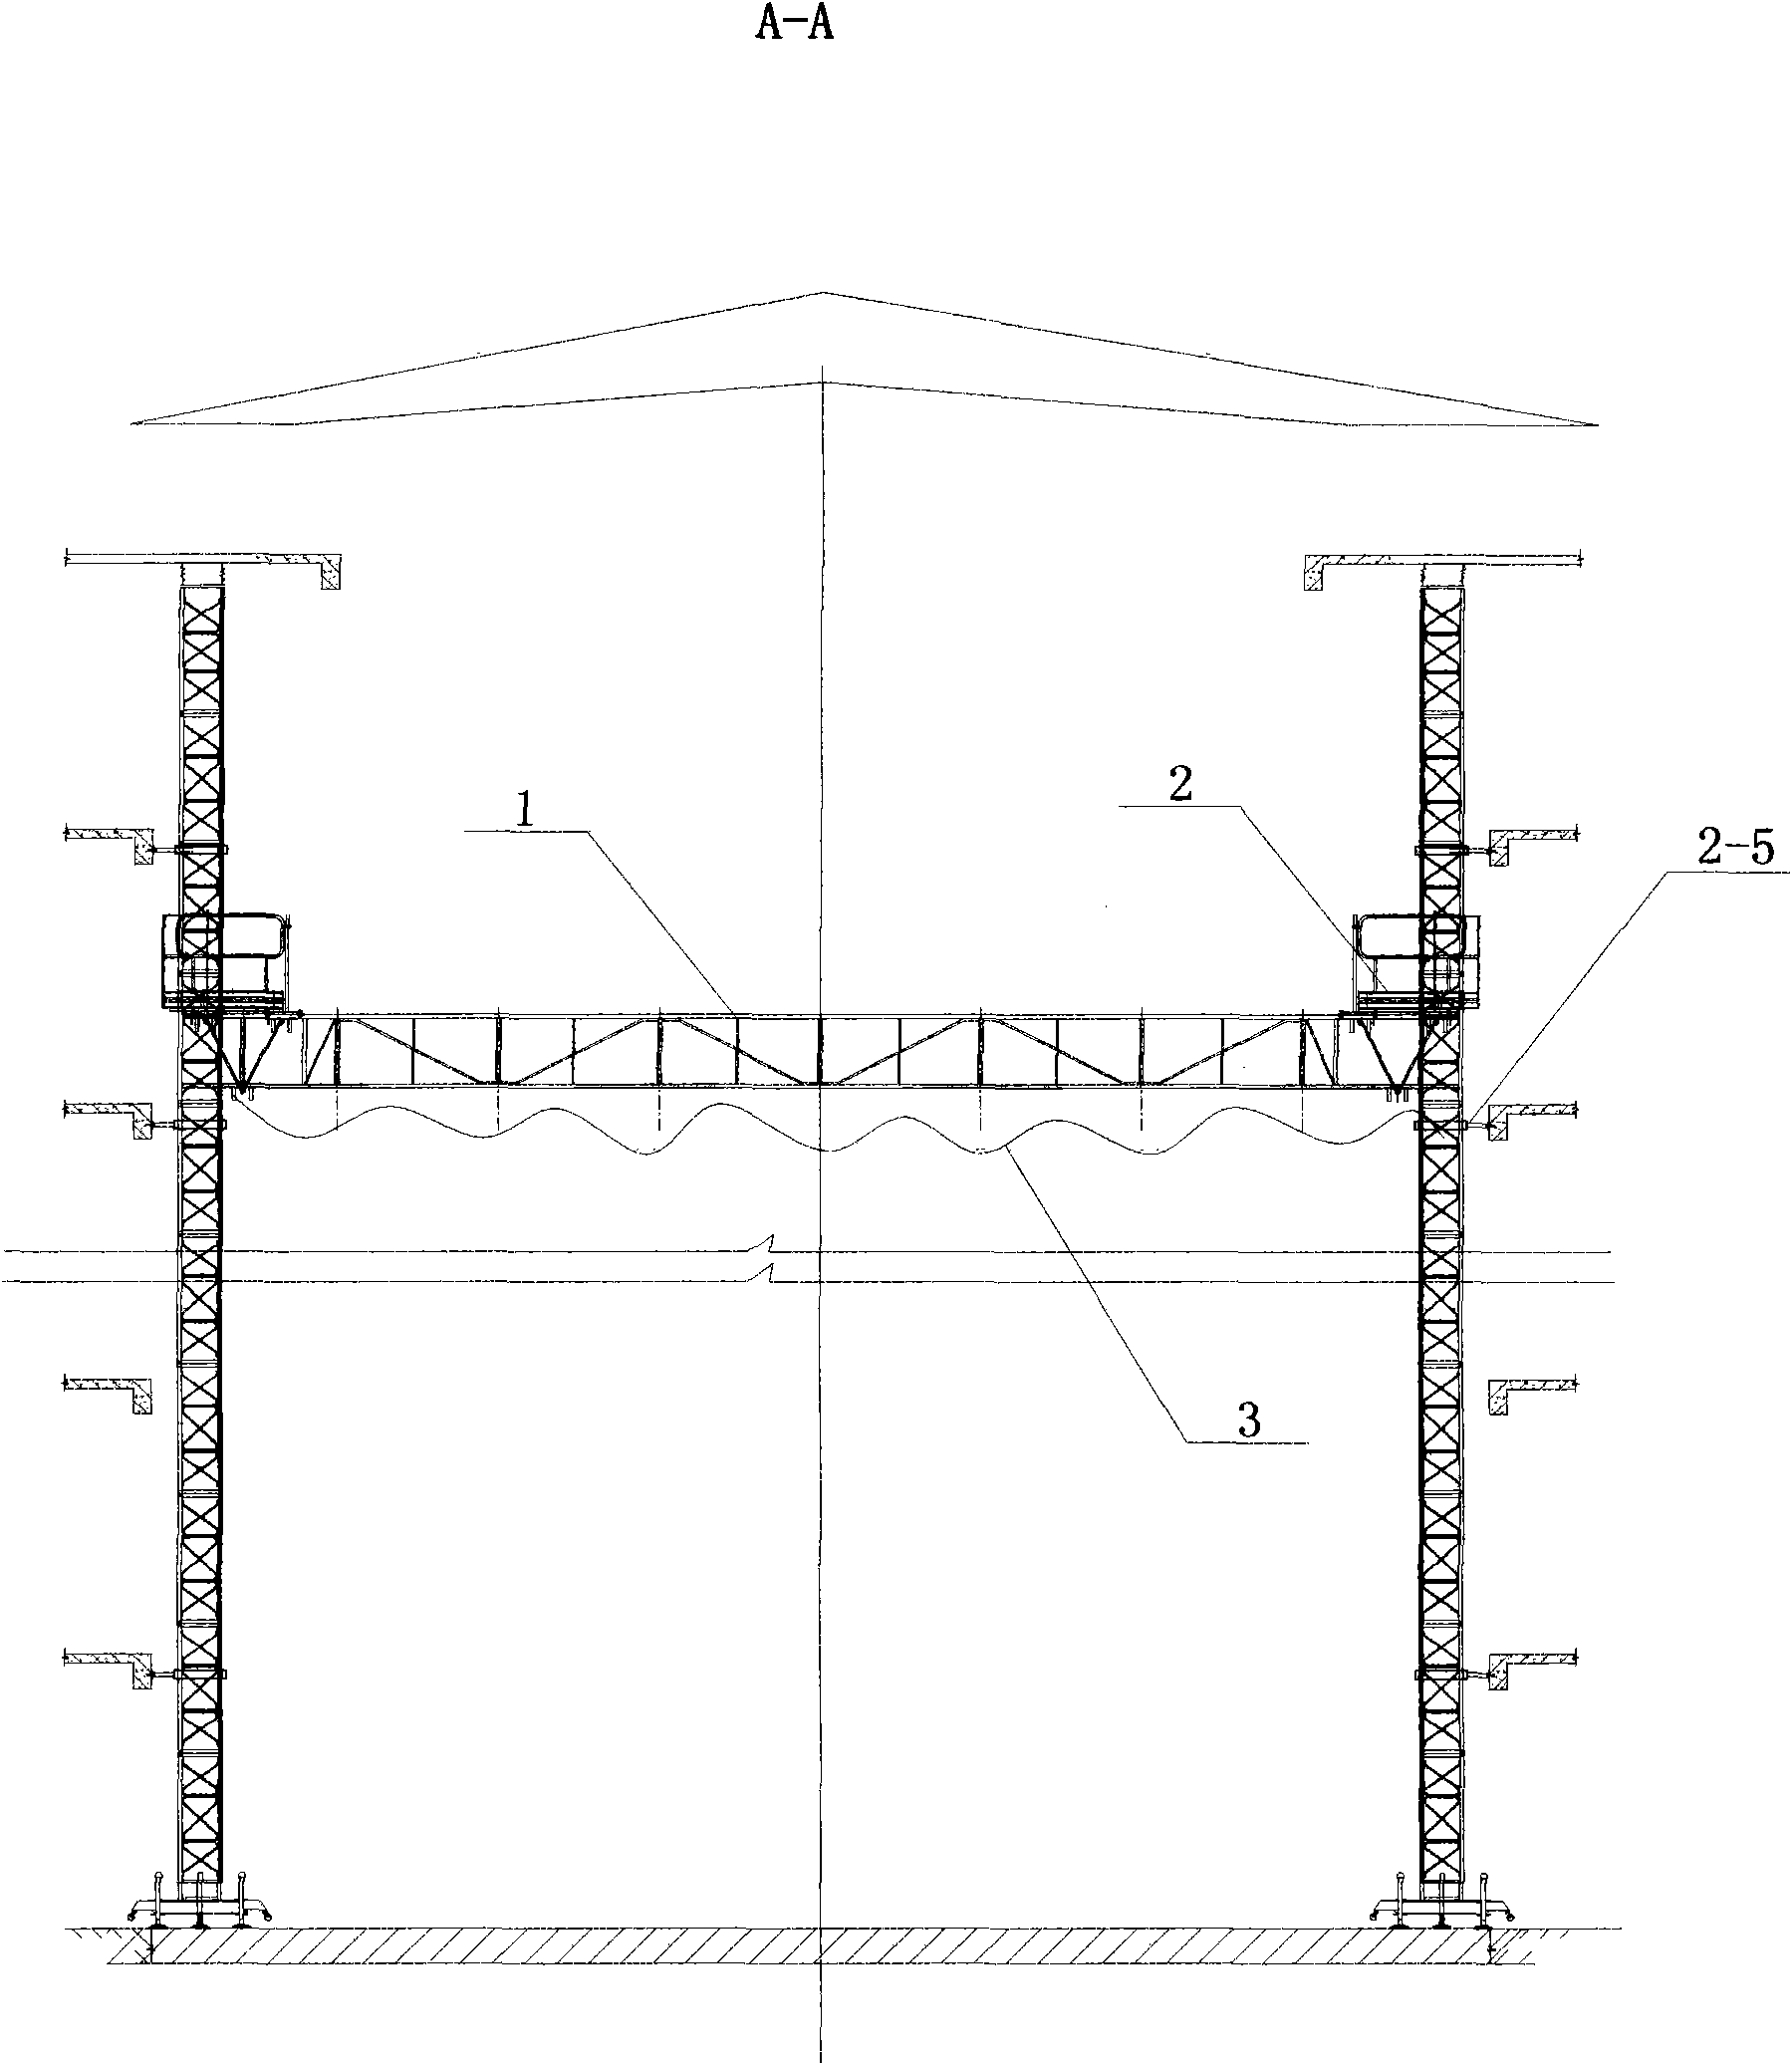 Lift system for constructing truss platform on top of tall and large space